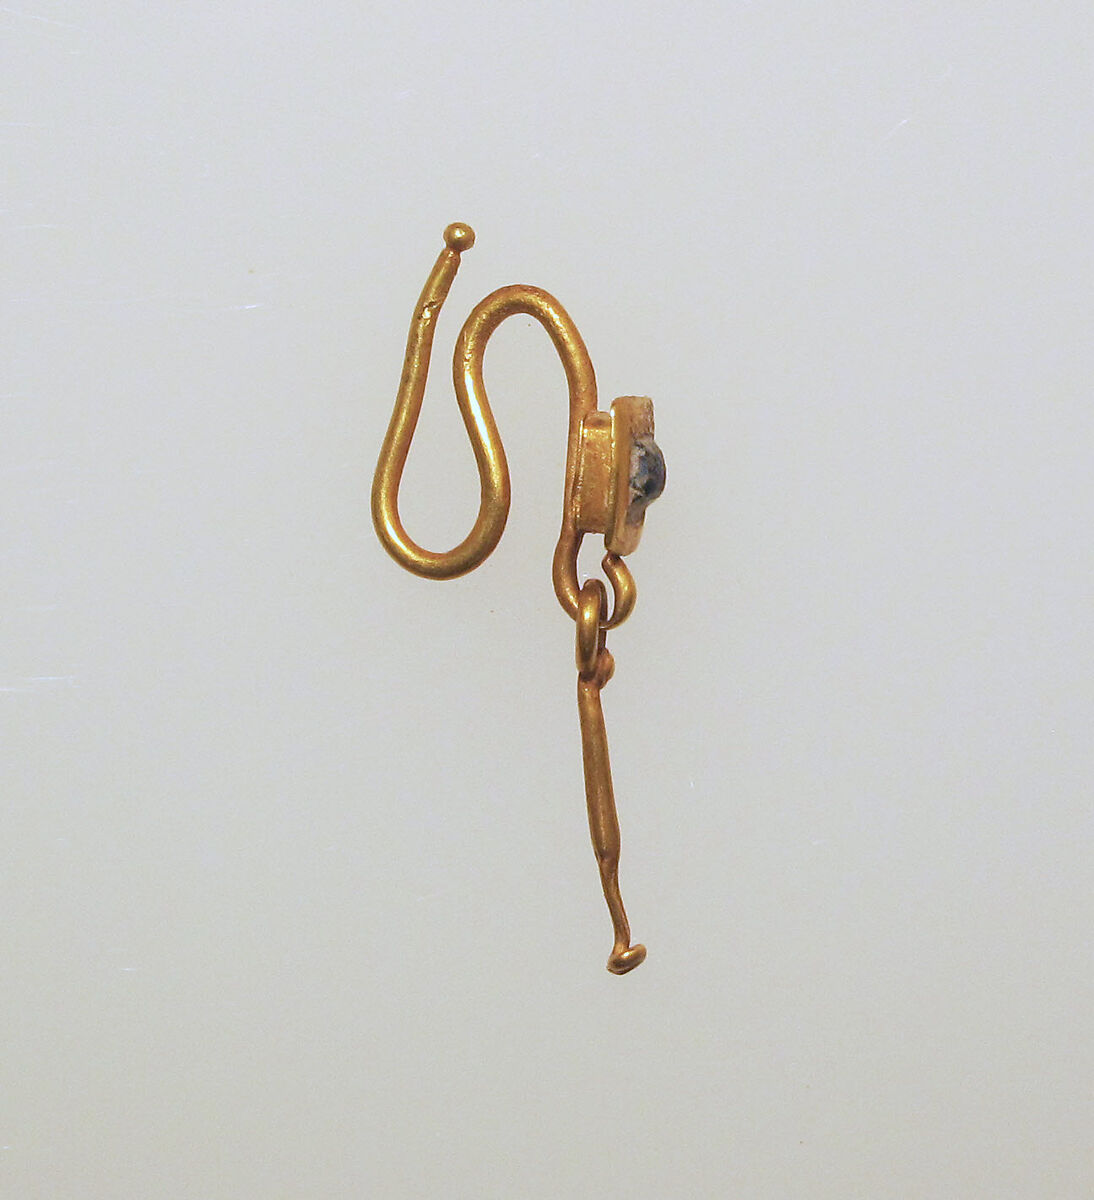 Gold earring with pendant and paste setting, Gold, glass paste, Roman 